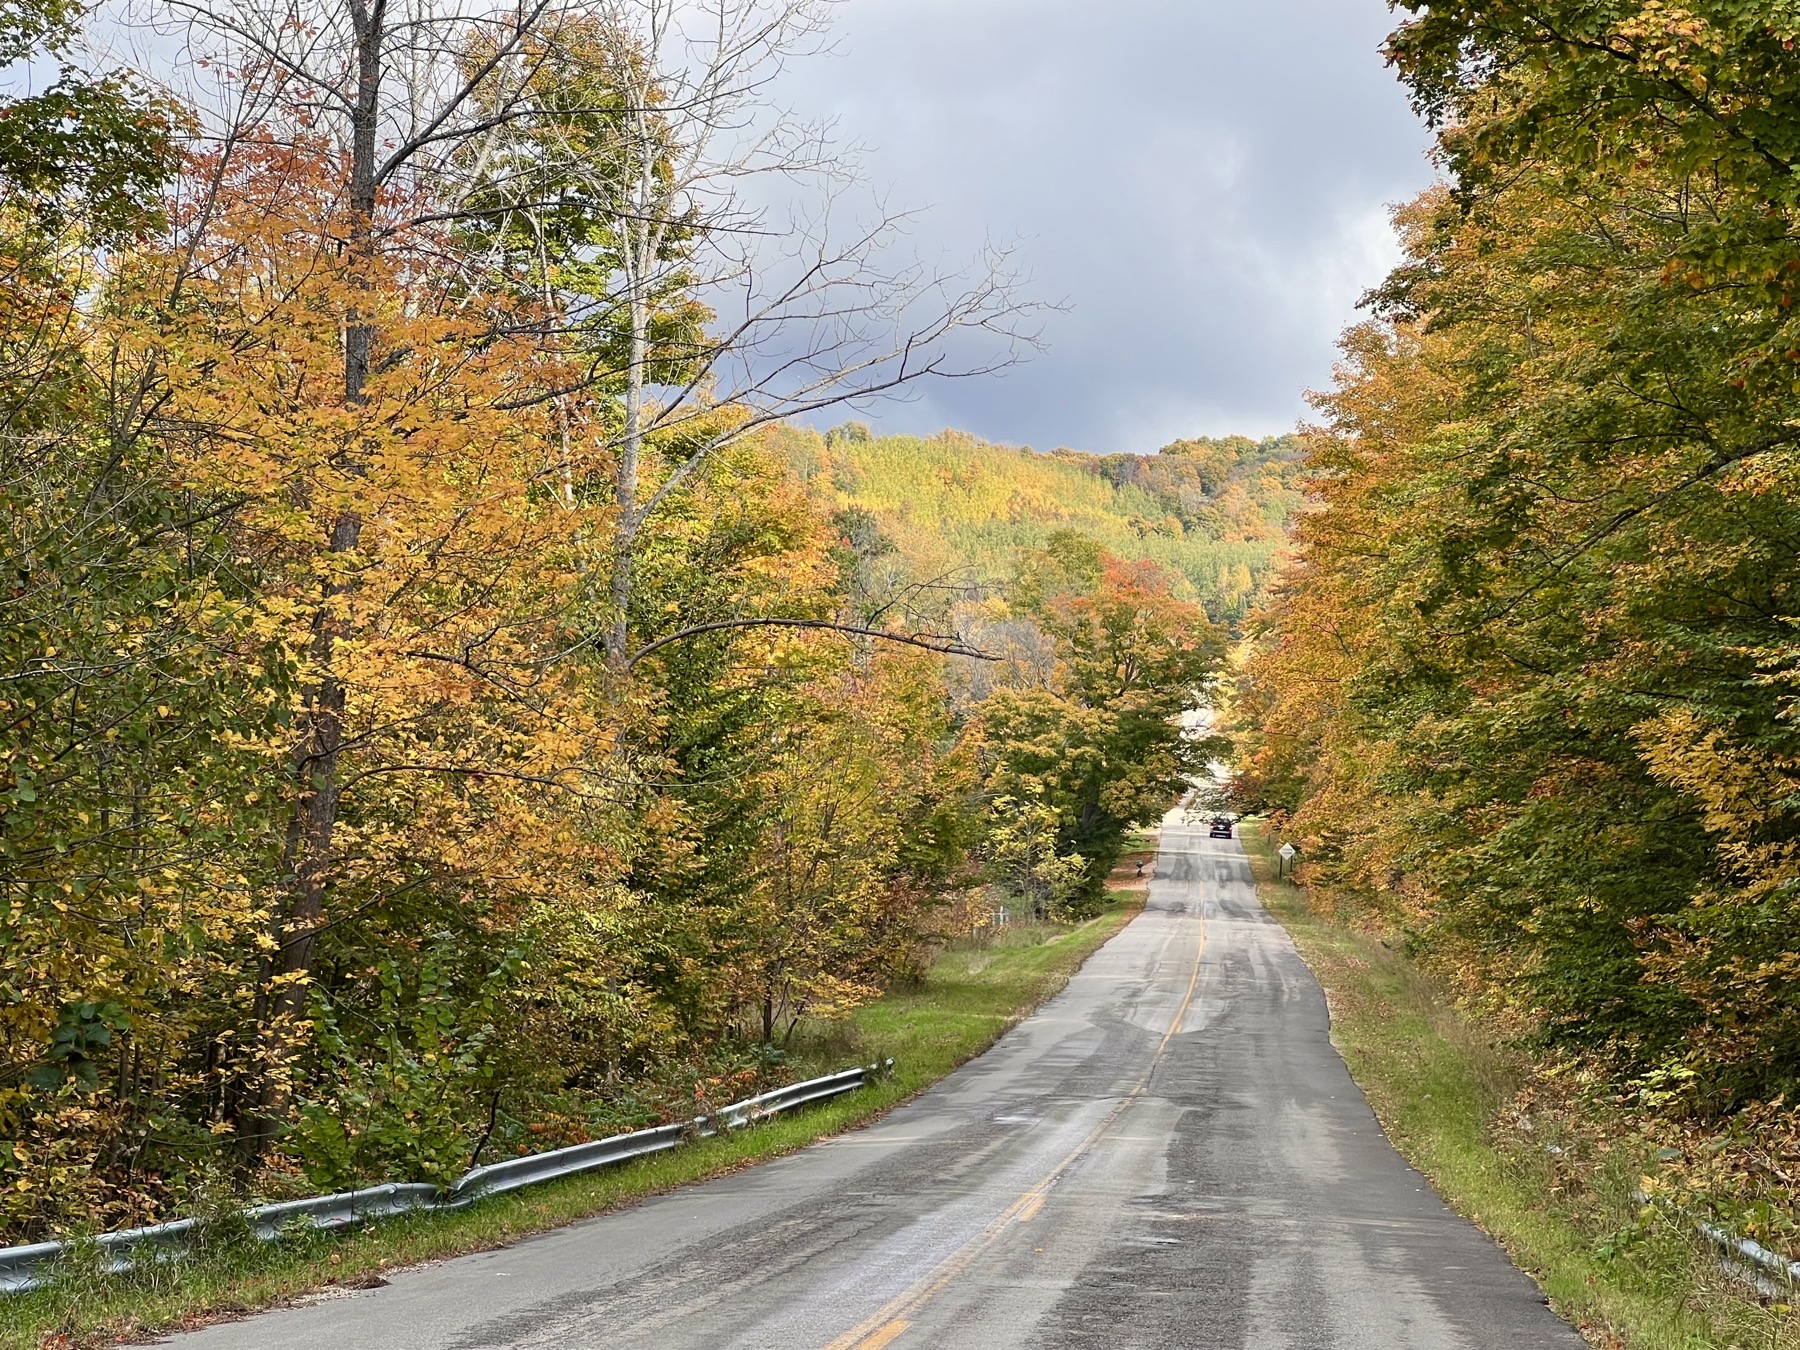 Road surrounded with trees in autumn